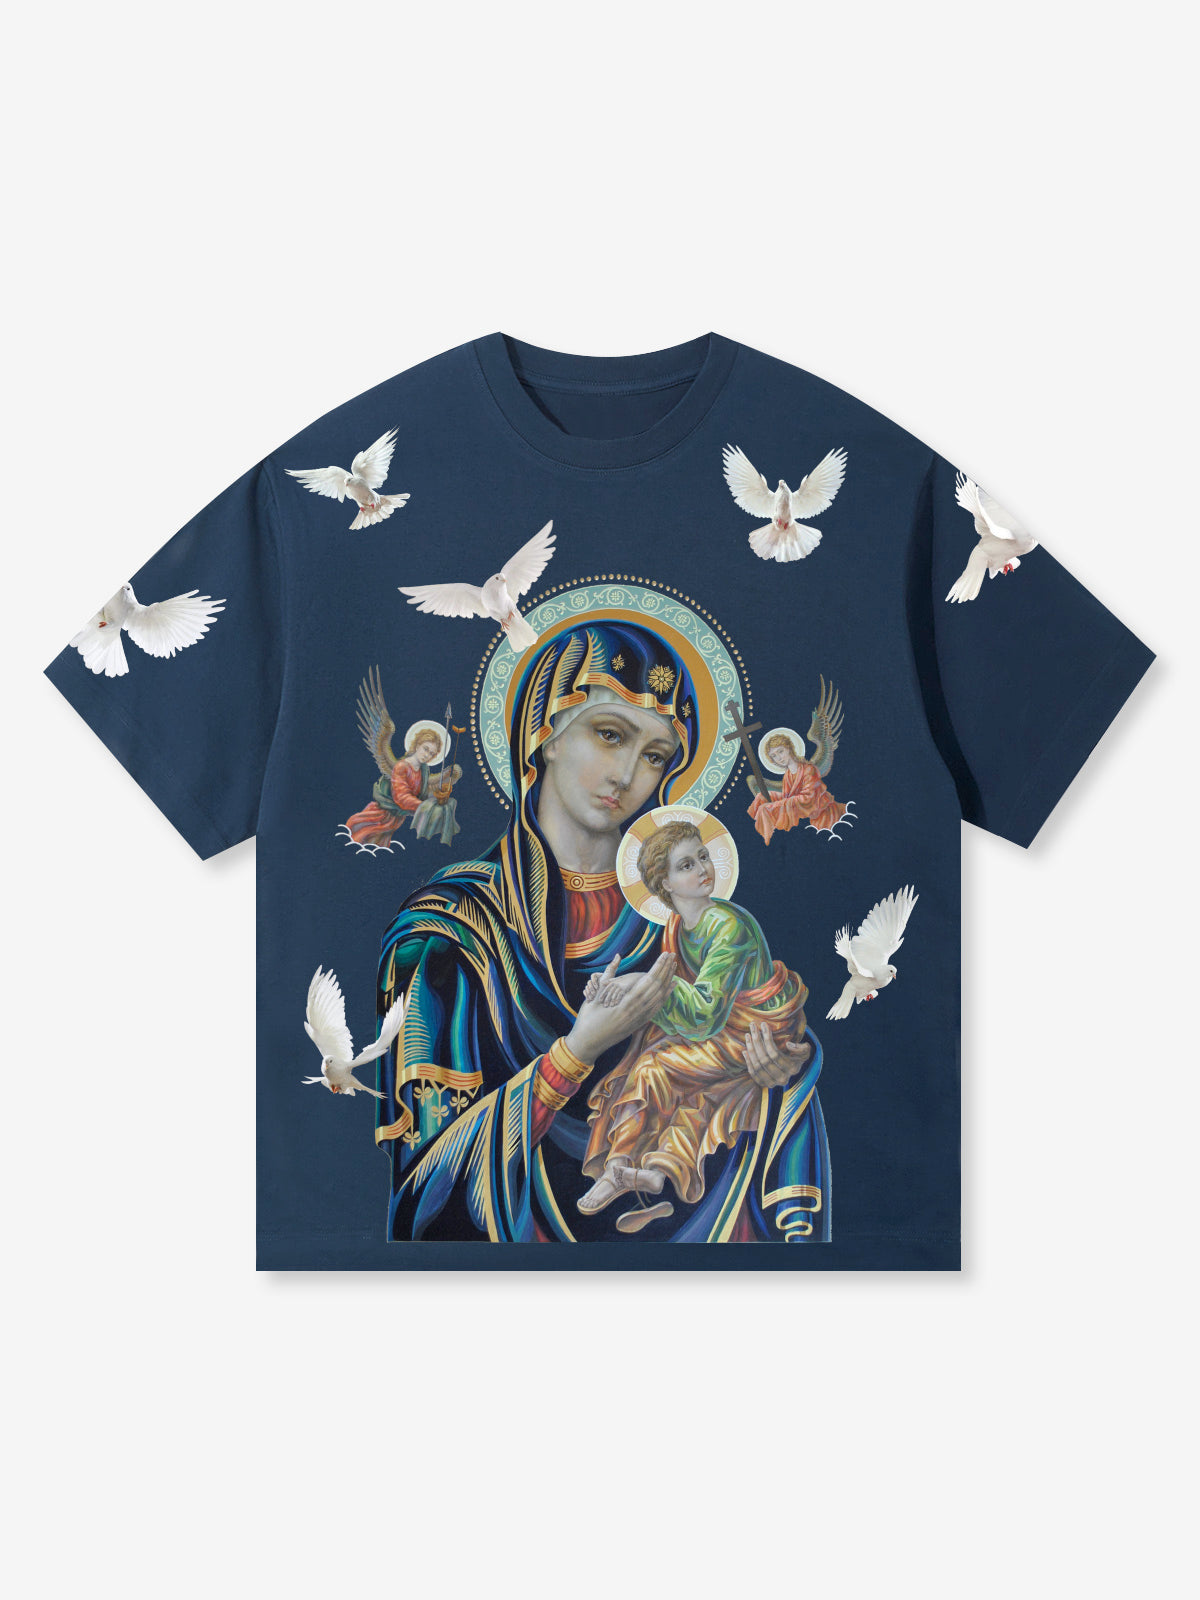 OBSTACLES & DANGERS© Black Madonna and Child T-shirt